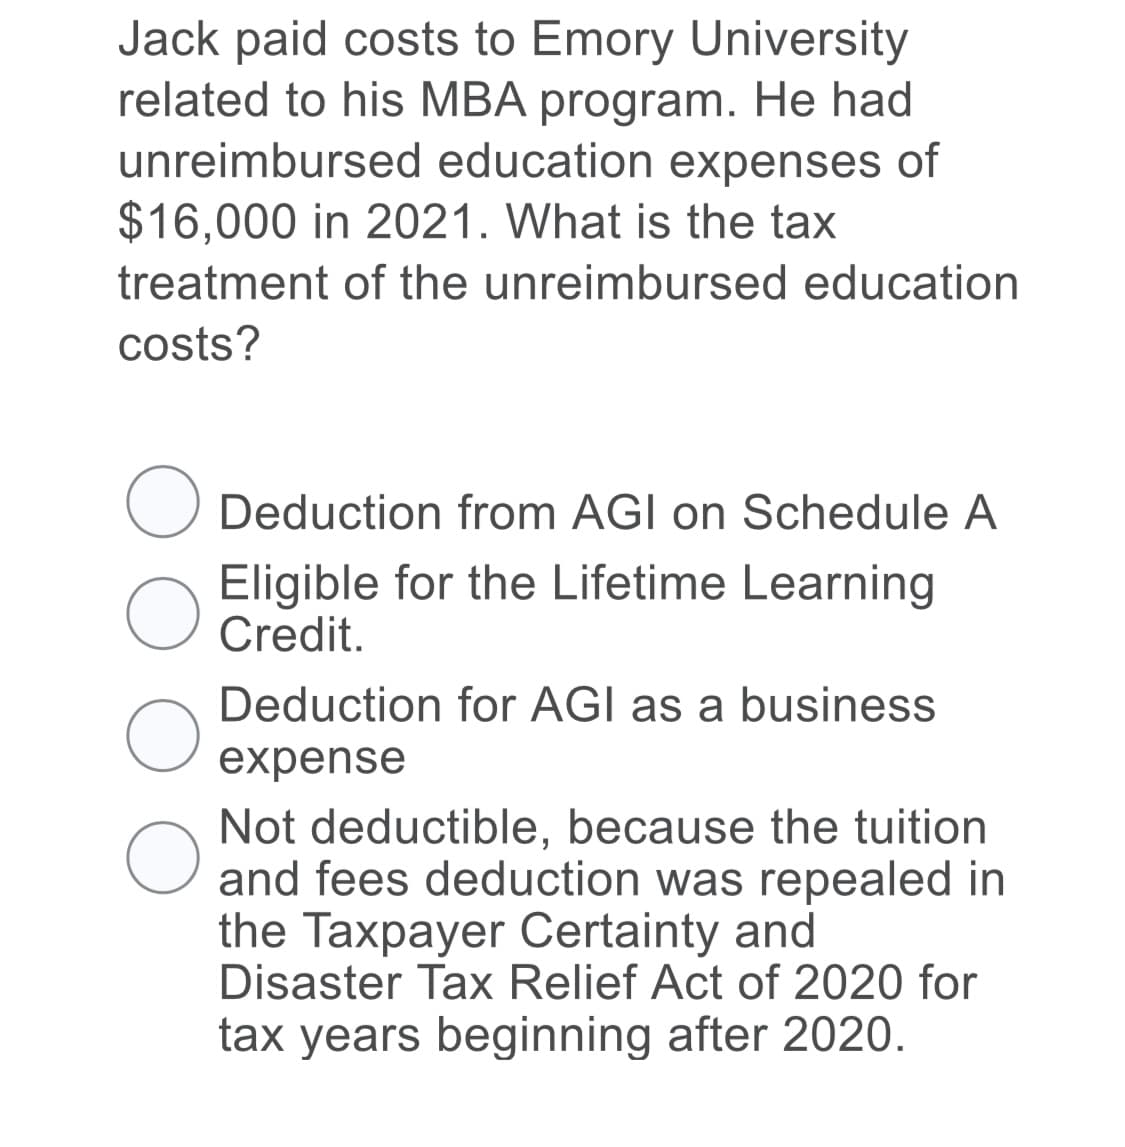 Jack paid costs to Emory University
related to his MBA program. He had
unreimbursed education expenses of
$16,000 in 2021. What is the tax
treatment of the unreimbursed education
costs?
Deduction from AGI on Schedule A
Eligible for the Lifetime Learning
Credit.
Deduction for AGI as a business
expense
Not deductible, because the tuition
and fees deduction was repealed in
the Taxpayer Certainty and
Disaster Tax Relief Act of 2020 for
tax years beginning after 2020.
